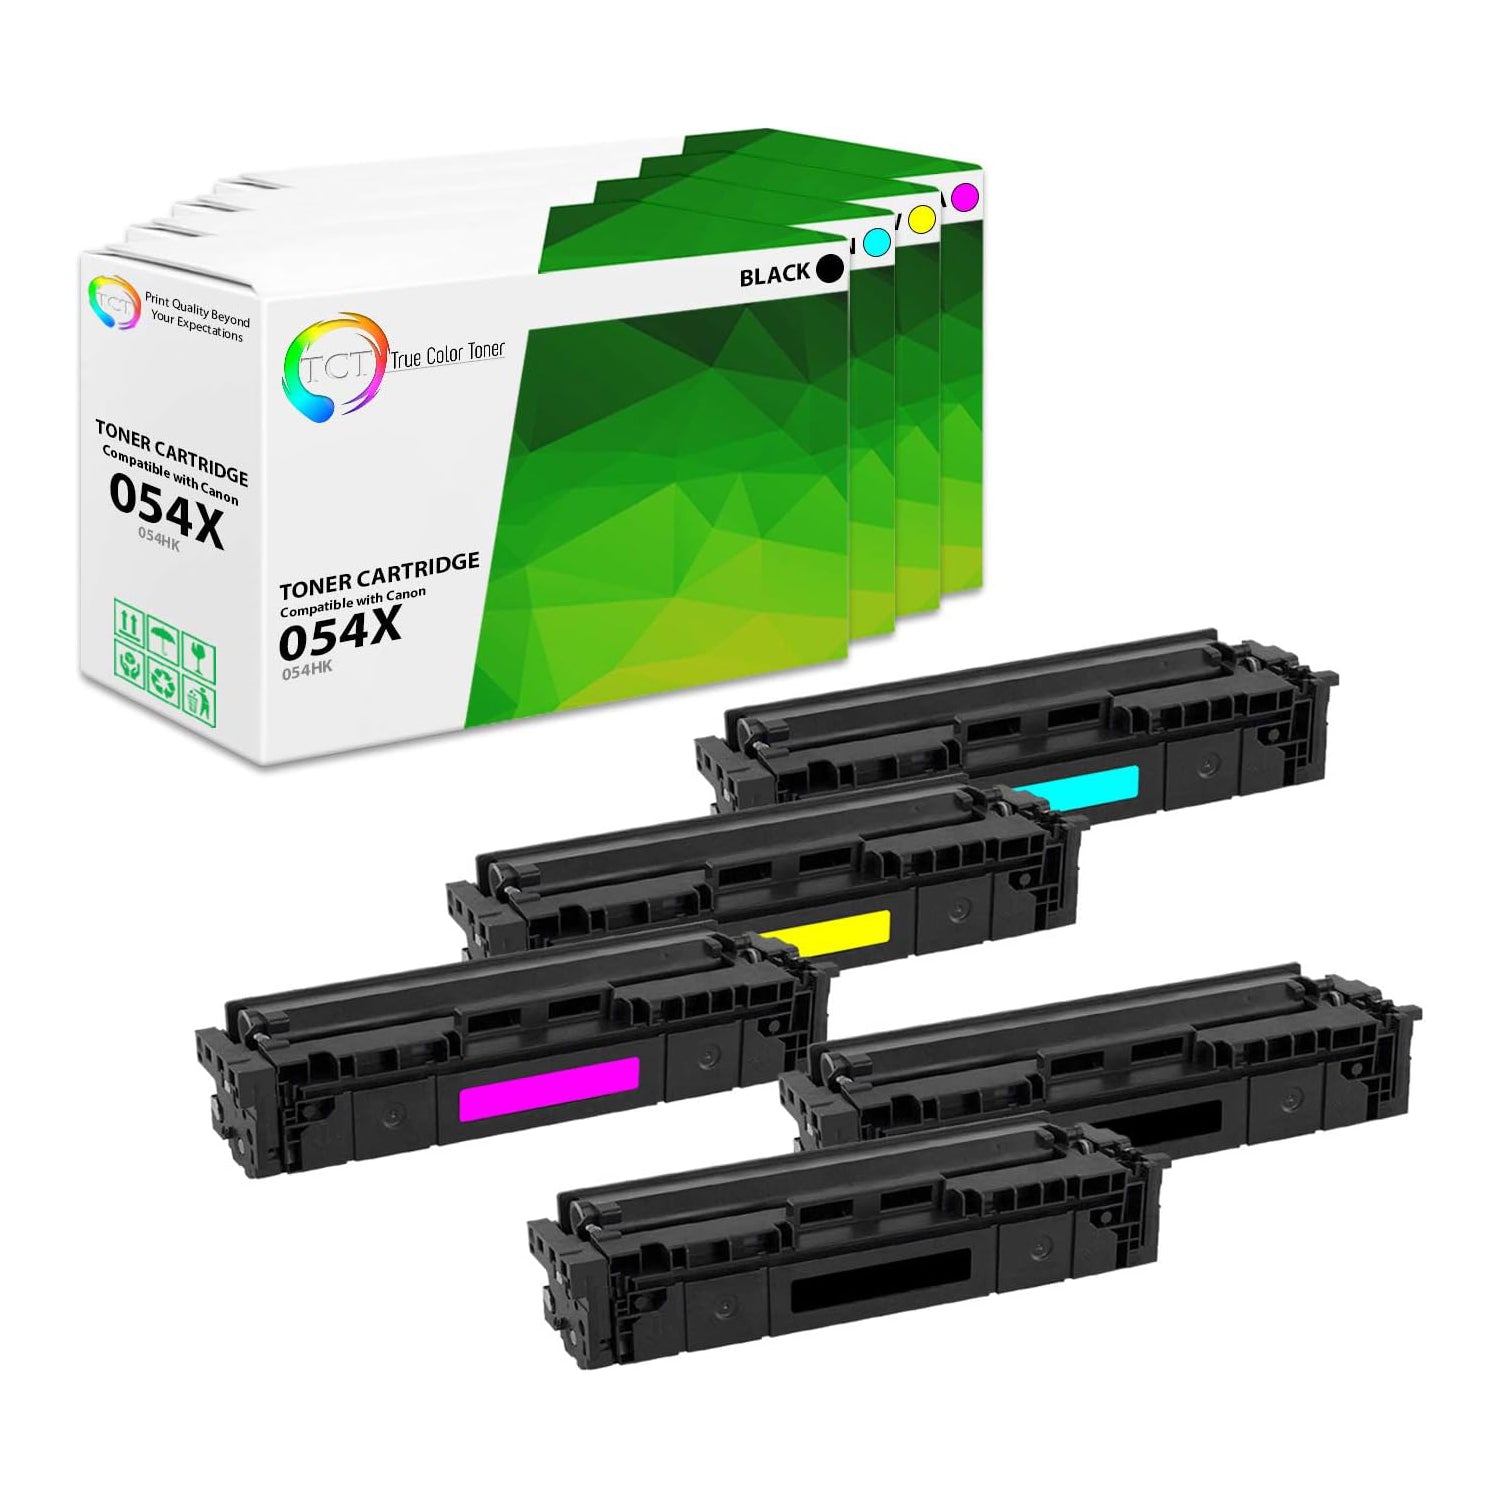 TCT Compatible HY Toner Cartridge Replacement for the Canon 054 Series - 5 Pack (BK, C, M, Y)